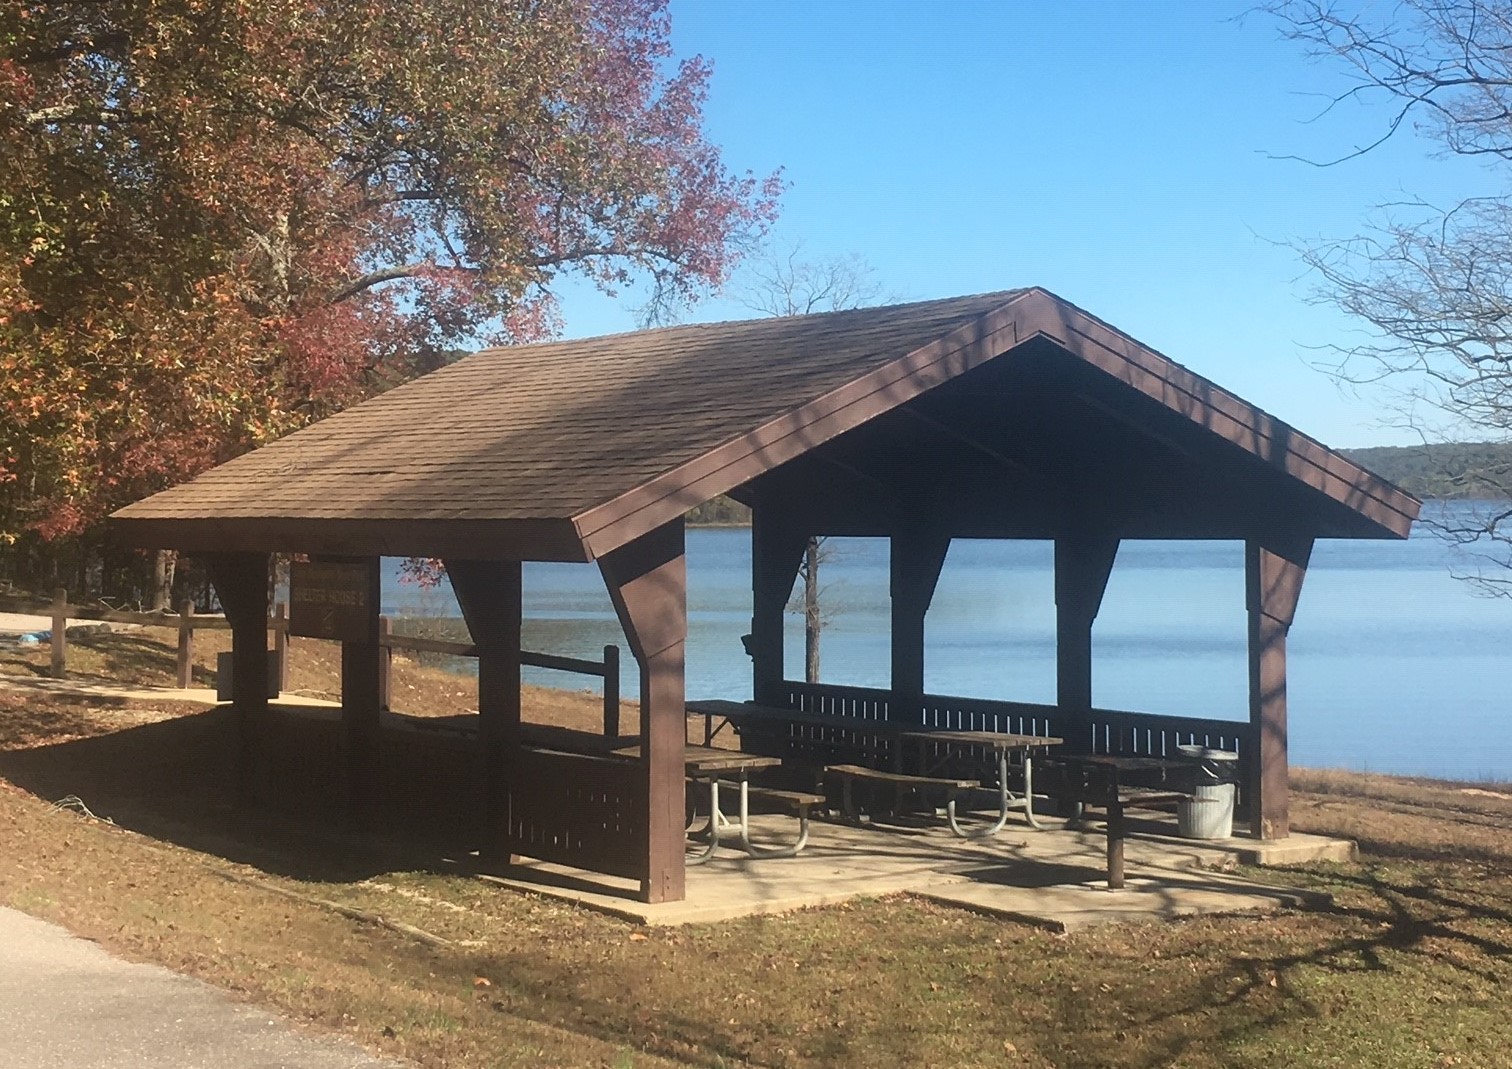 Picnic shelter with lake in background